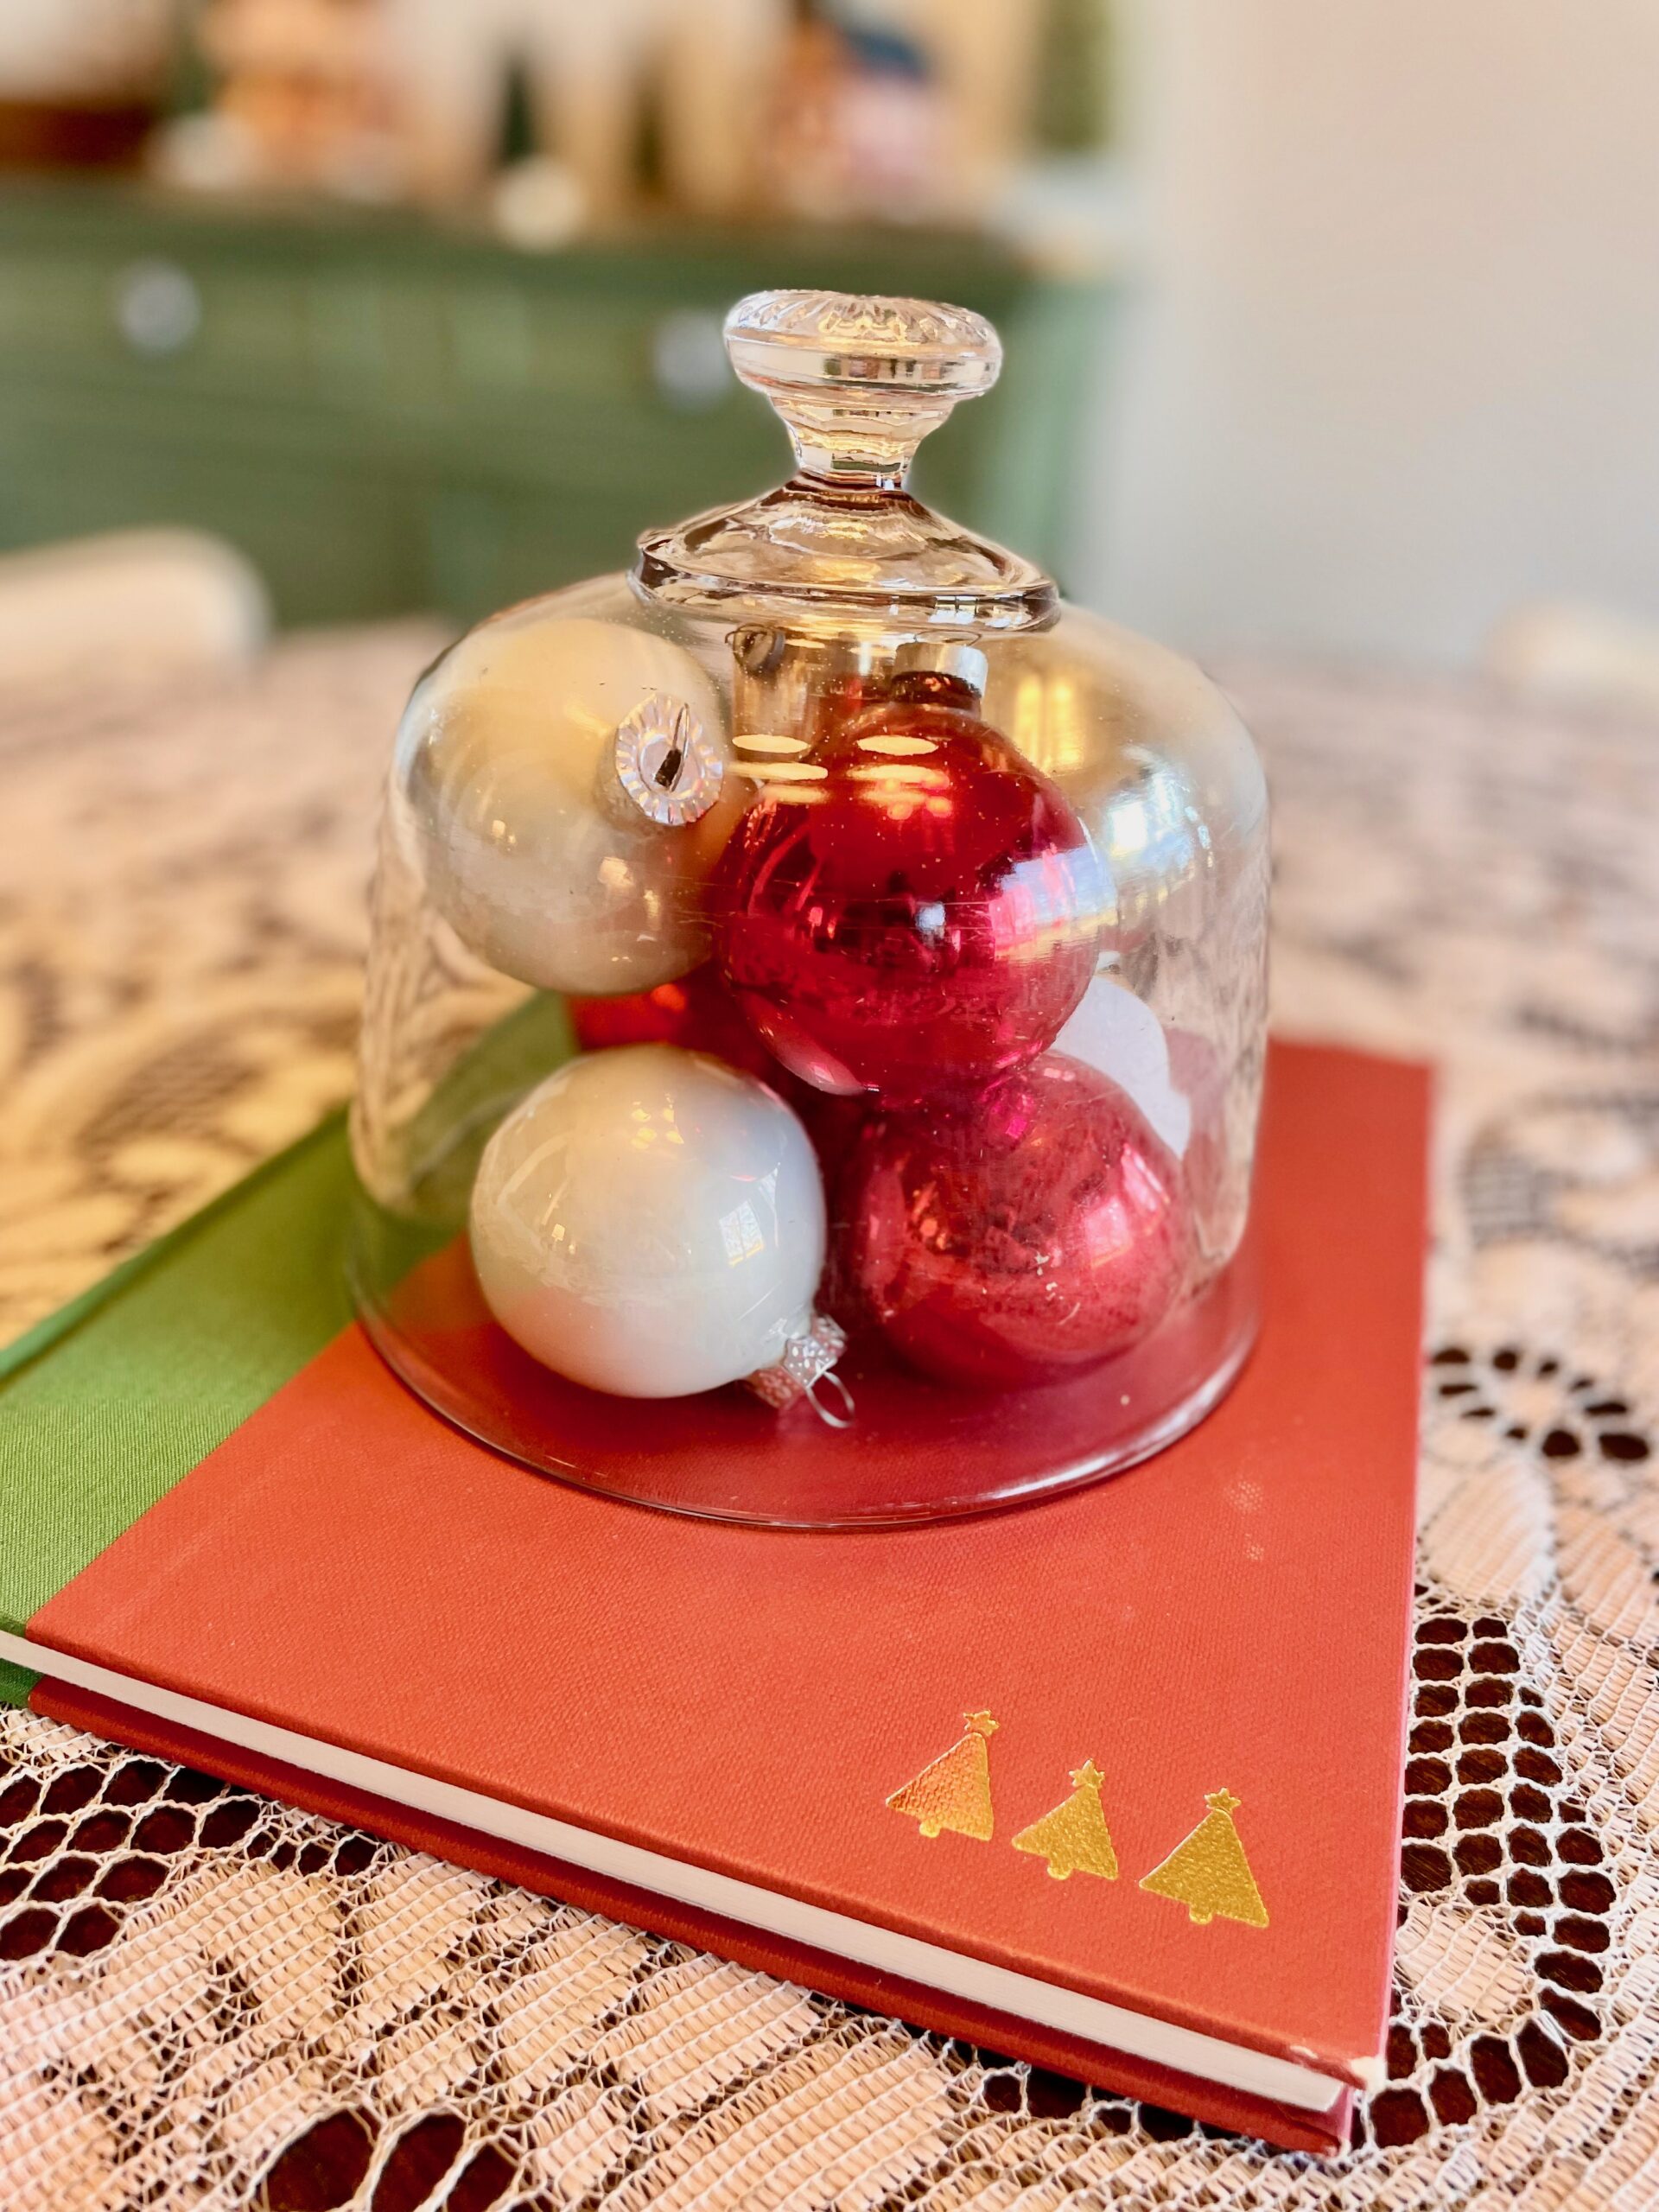 a Christmas centerpiece with vintage ornaments and a book